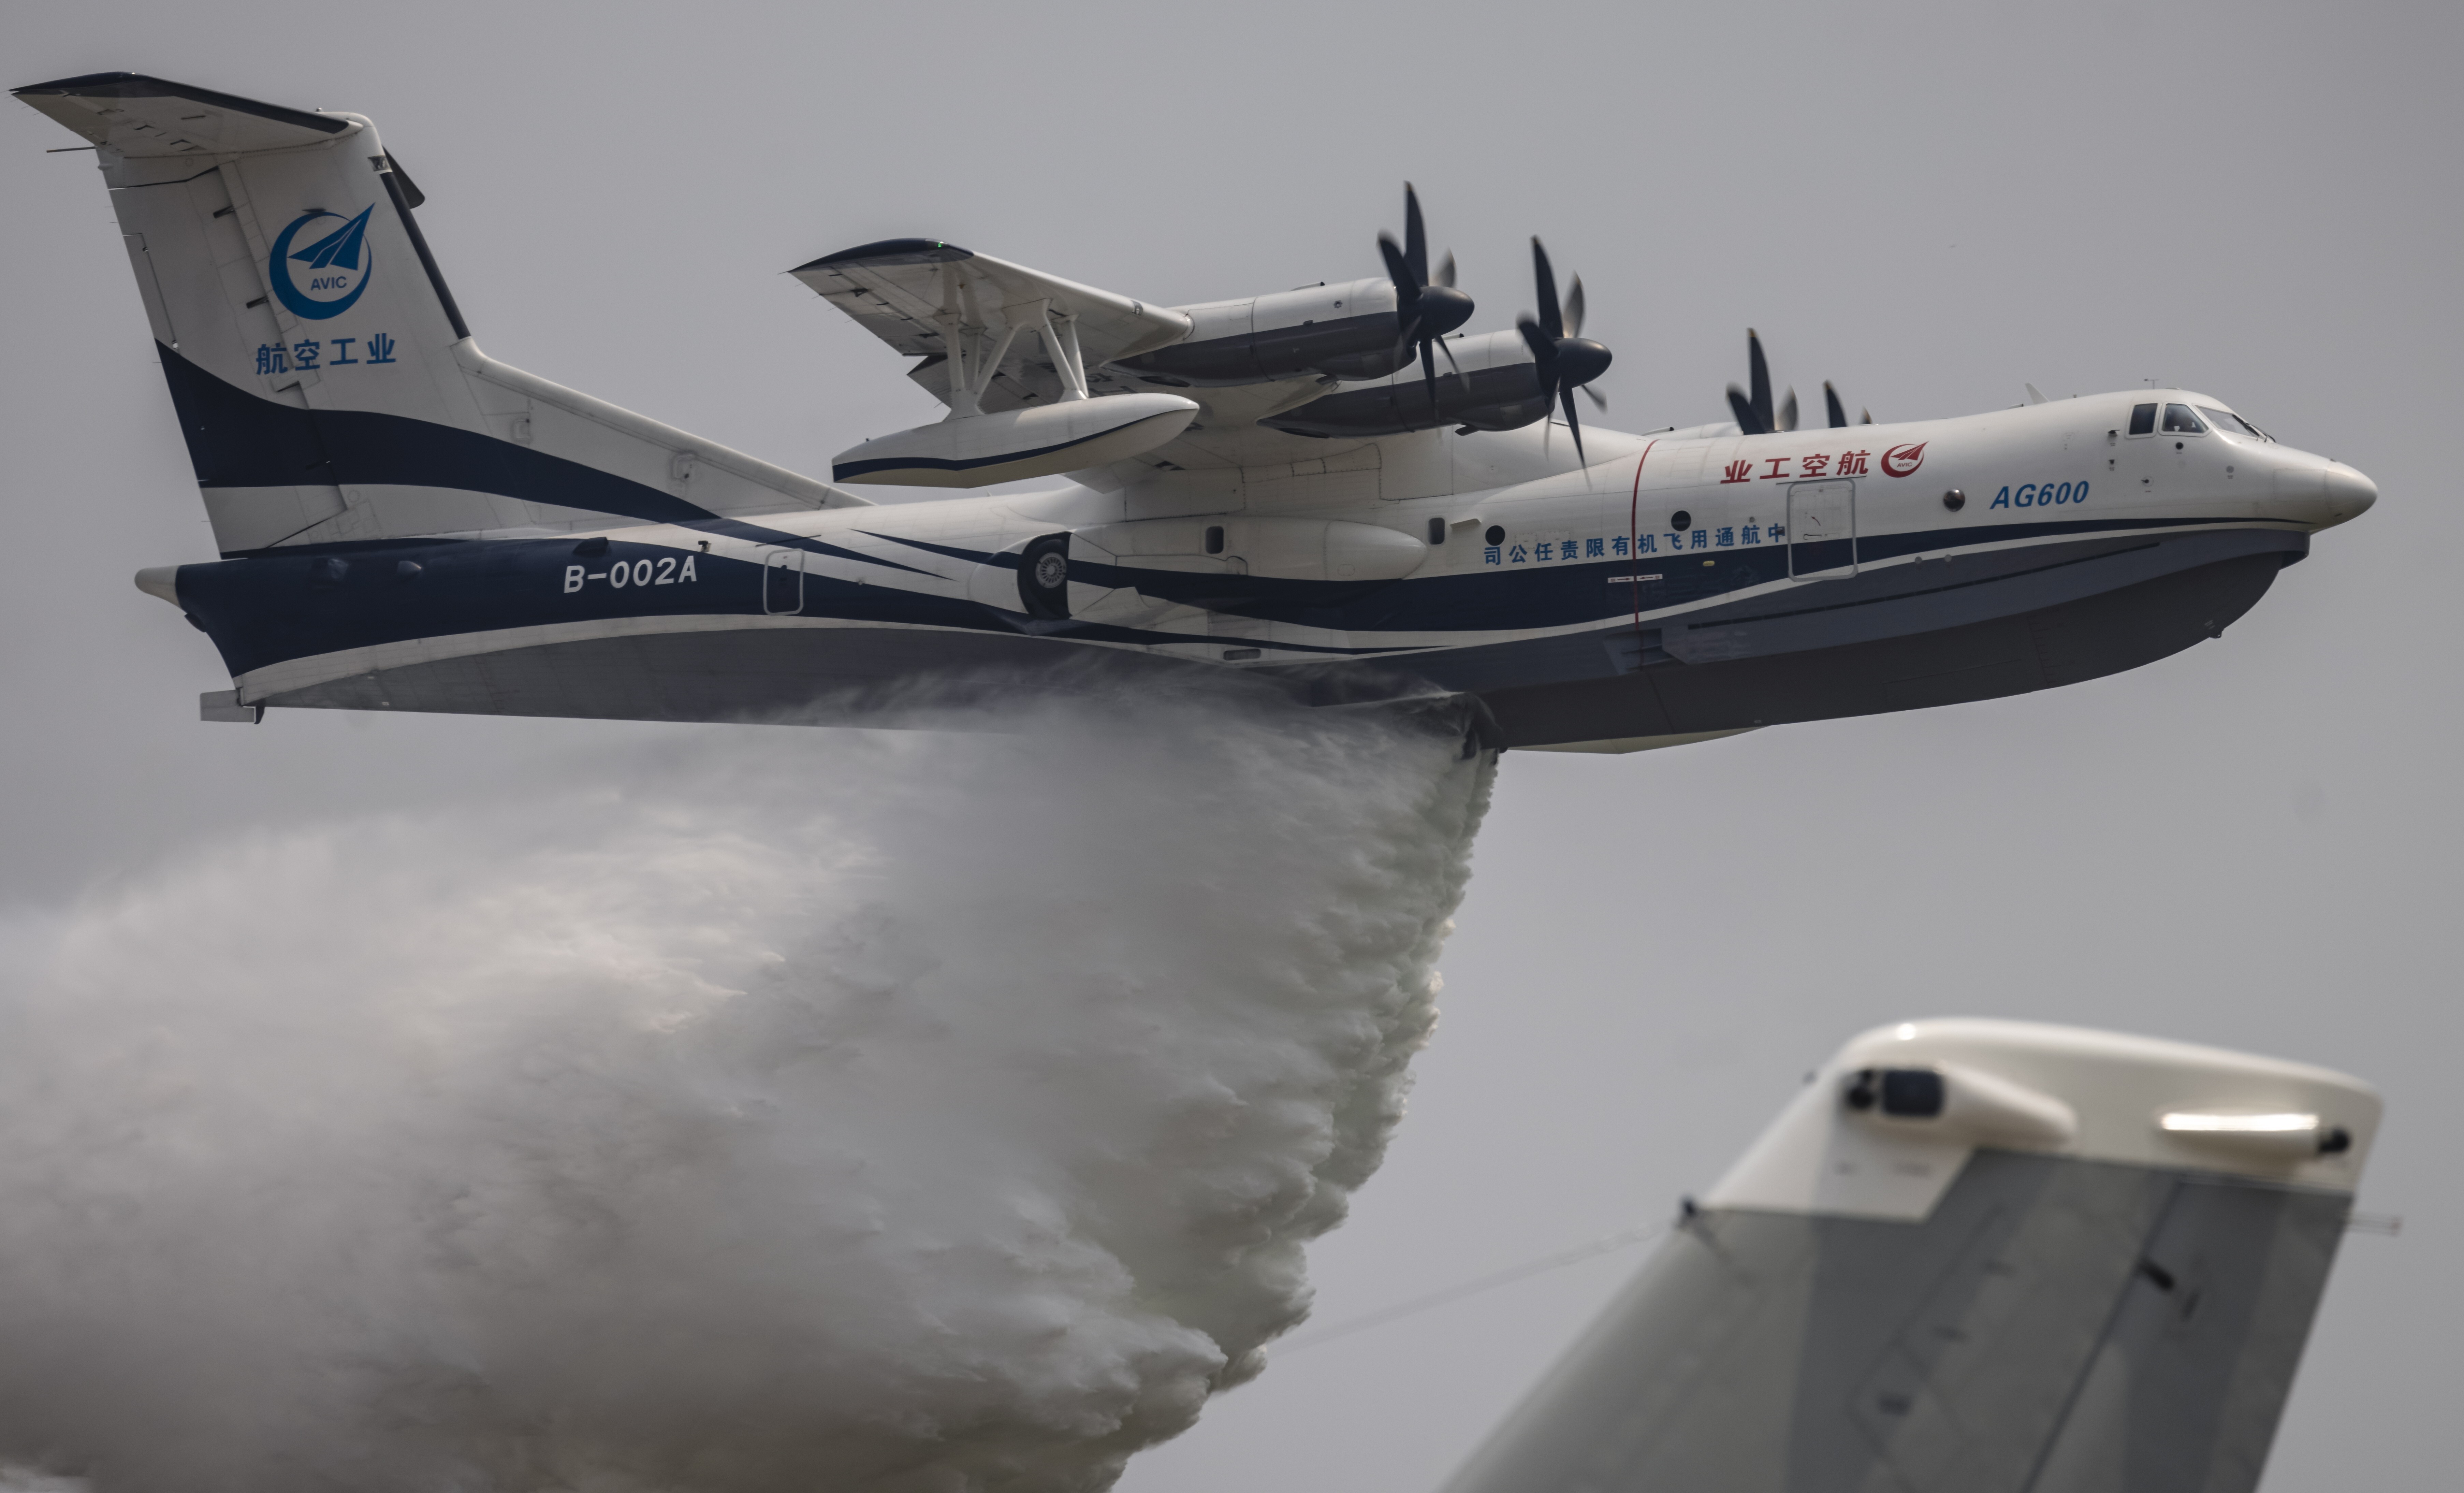 AVIC AG600 amphibious aircraft goes through its paces at the air show in Zhuhai on Tuesday. Photo: EPA-EFE